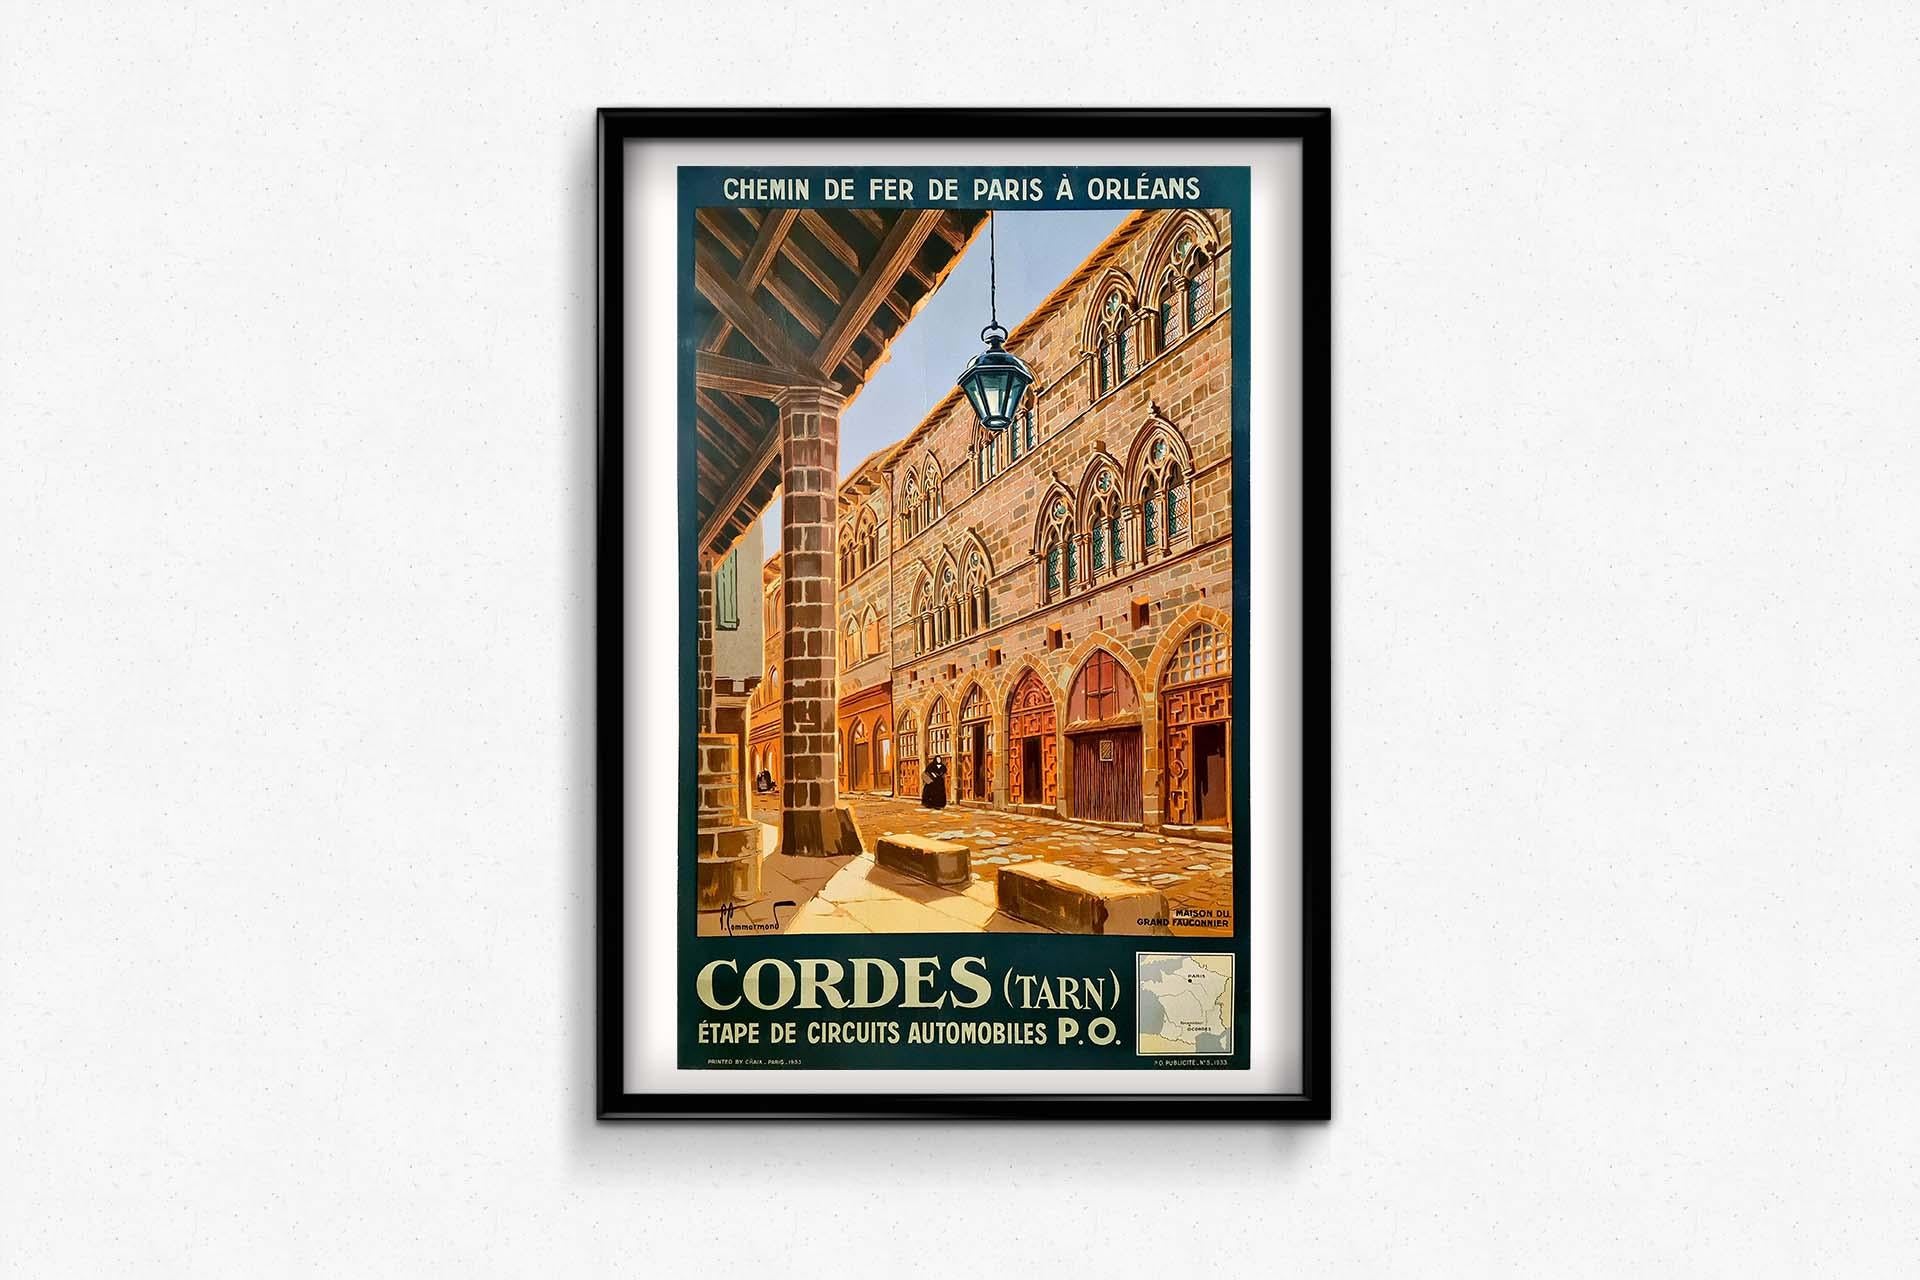 Crafted in 1933 by the talented artist Pierre Commarmond, the original travel poster for Cordes – Maison du Grand Fauconnier, designed for the Chemins de Fer de Paris à Orléans, stands as a masterpiece of vintage travel advertising. In this